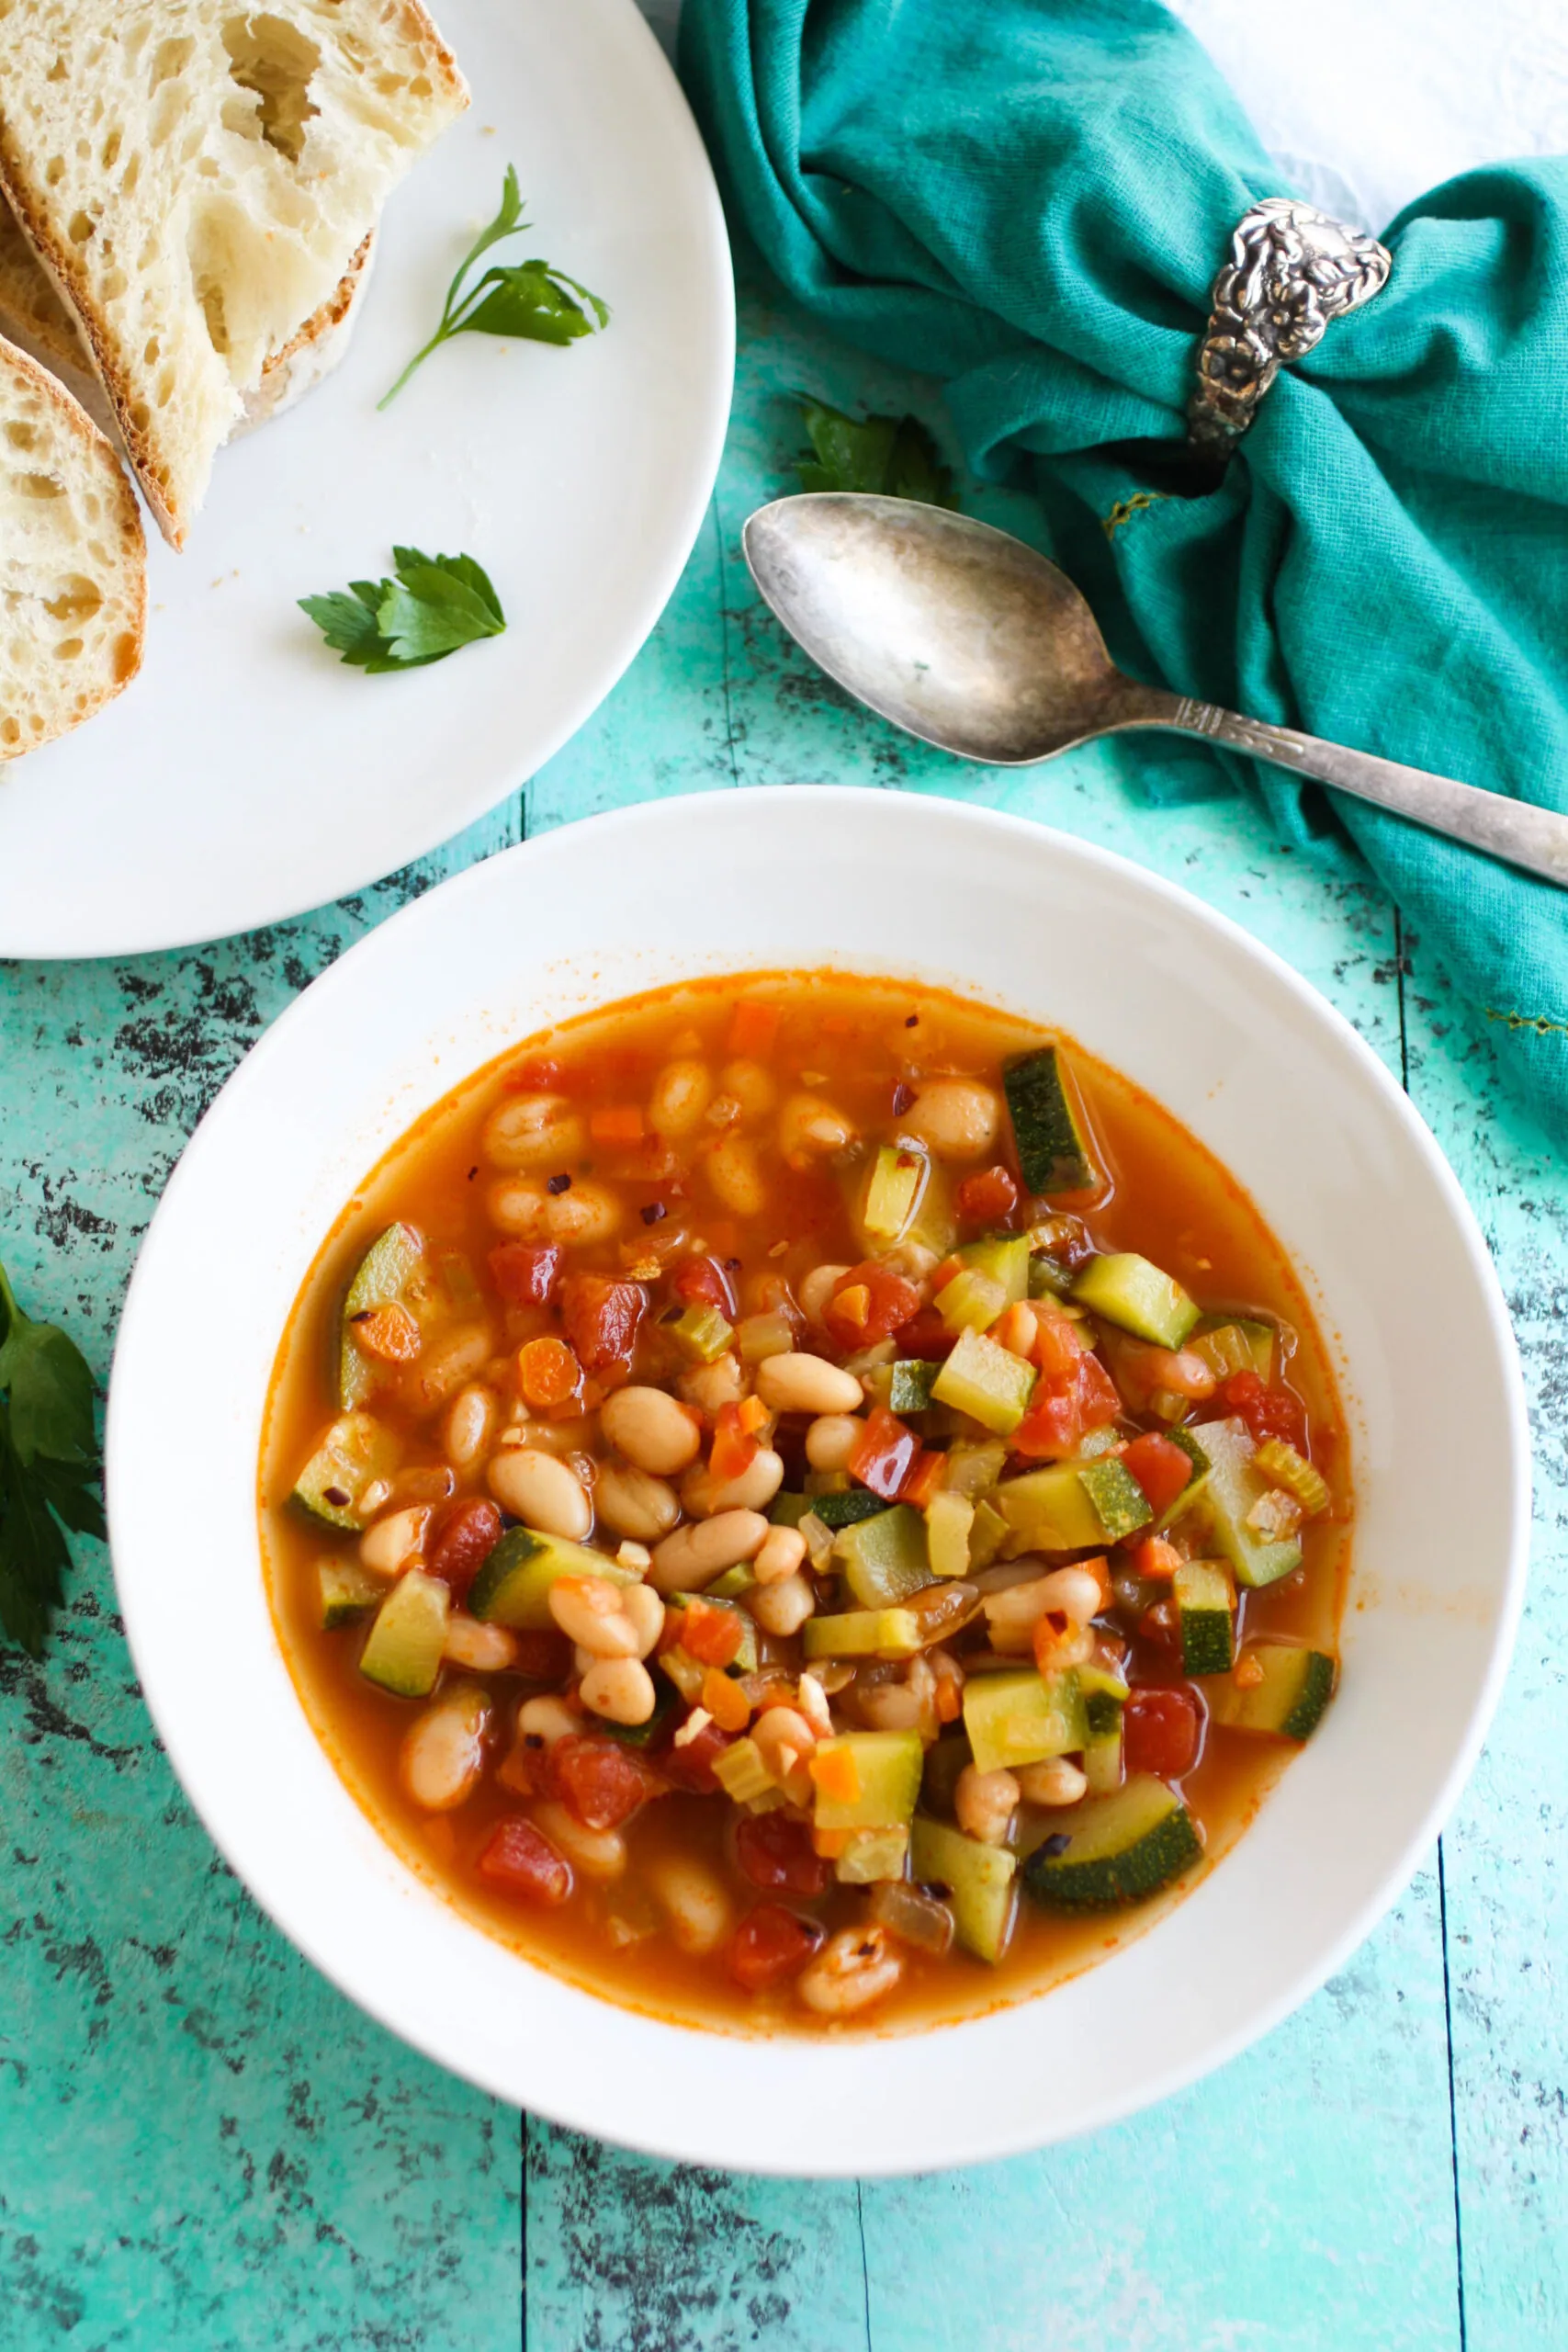 White Bean and Zucchini Soup is easy to make with basic ingredients for a hearty, healthy meal!